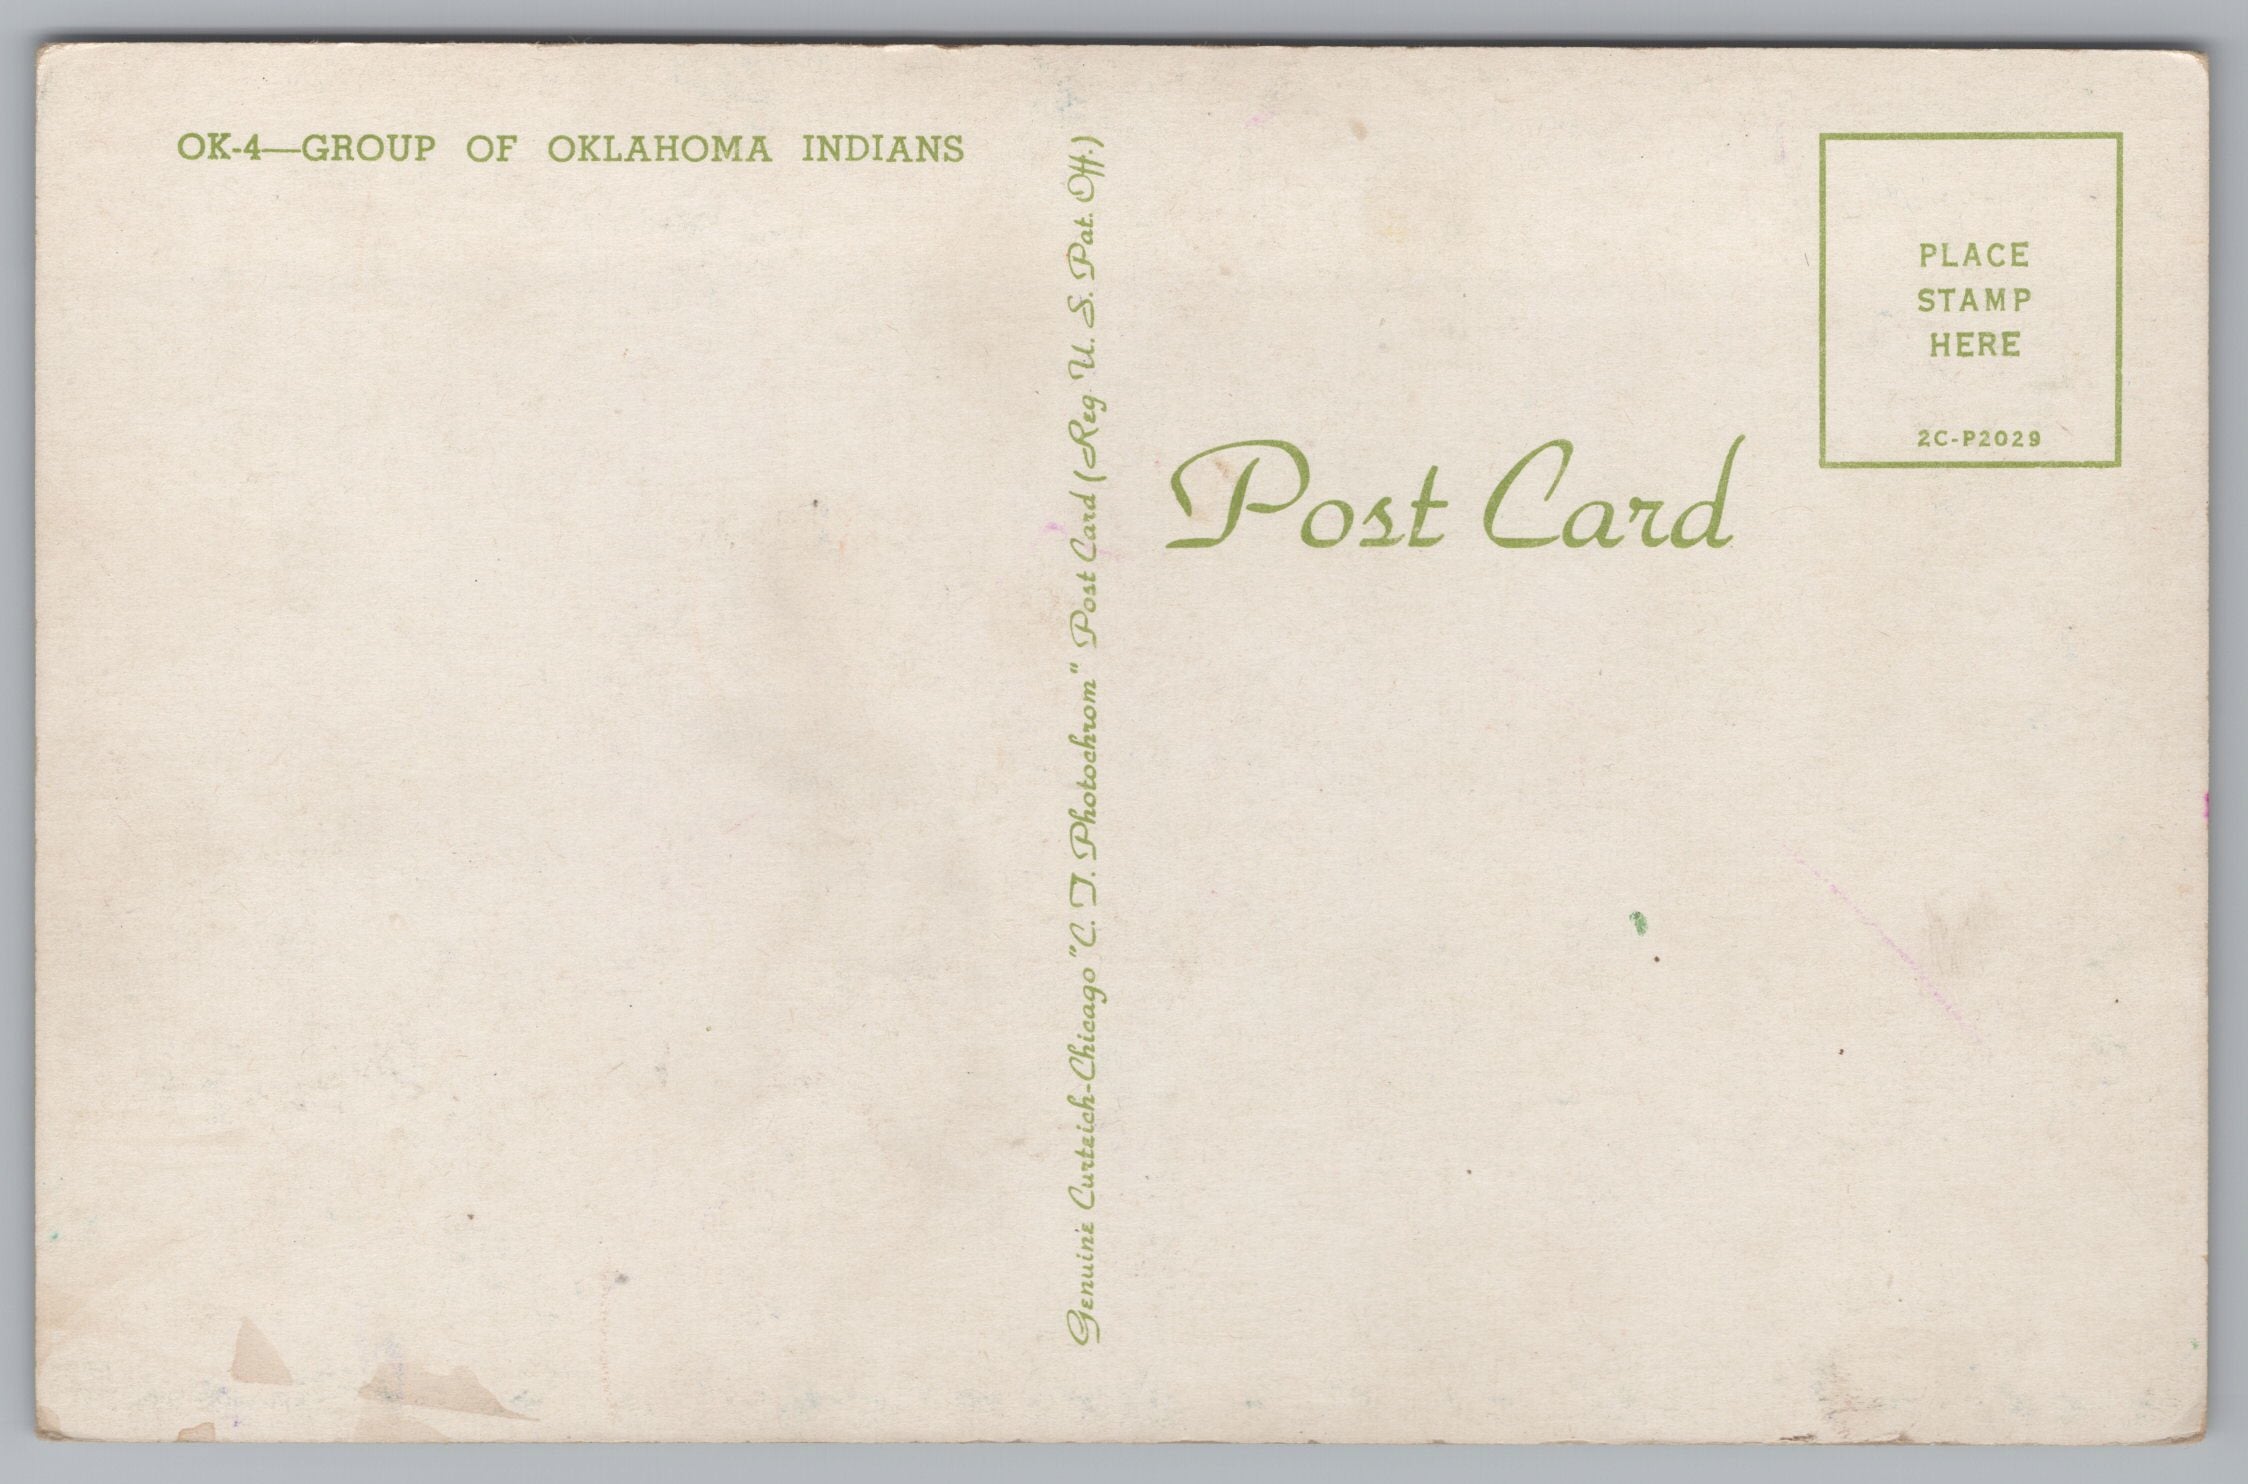 OK-4 Group Of The Oklahoma Indians, Vintage Post Card.